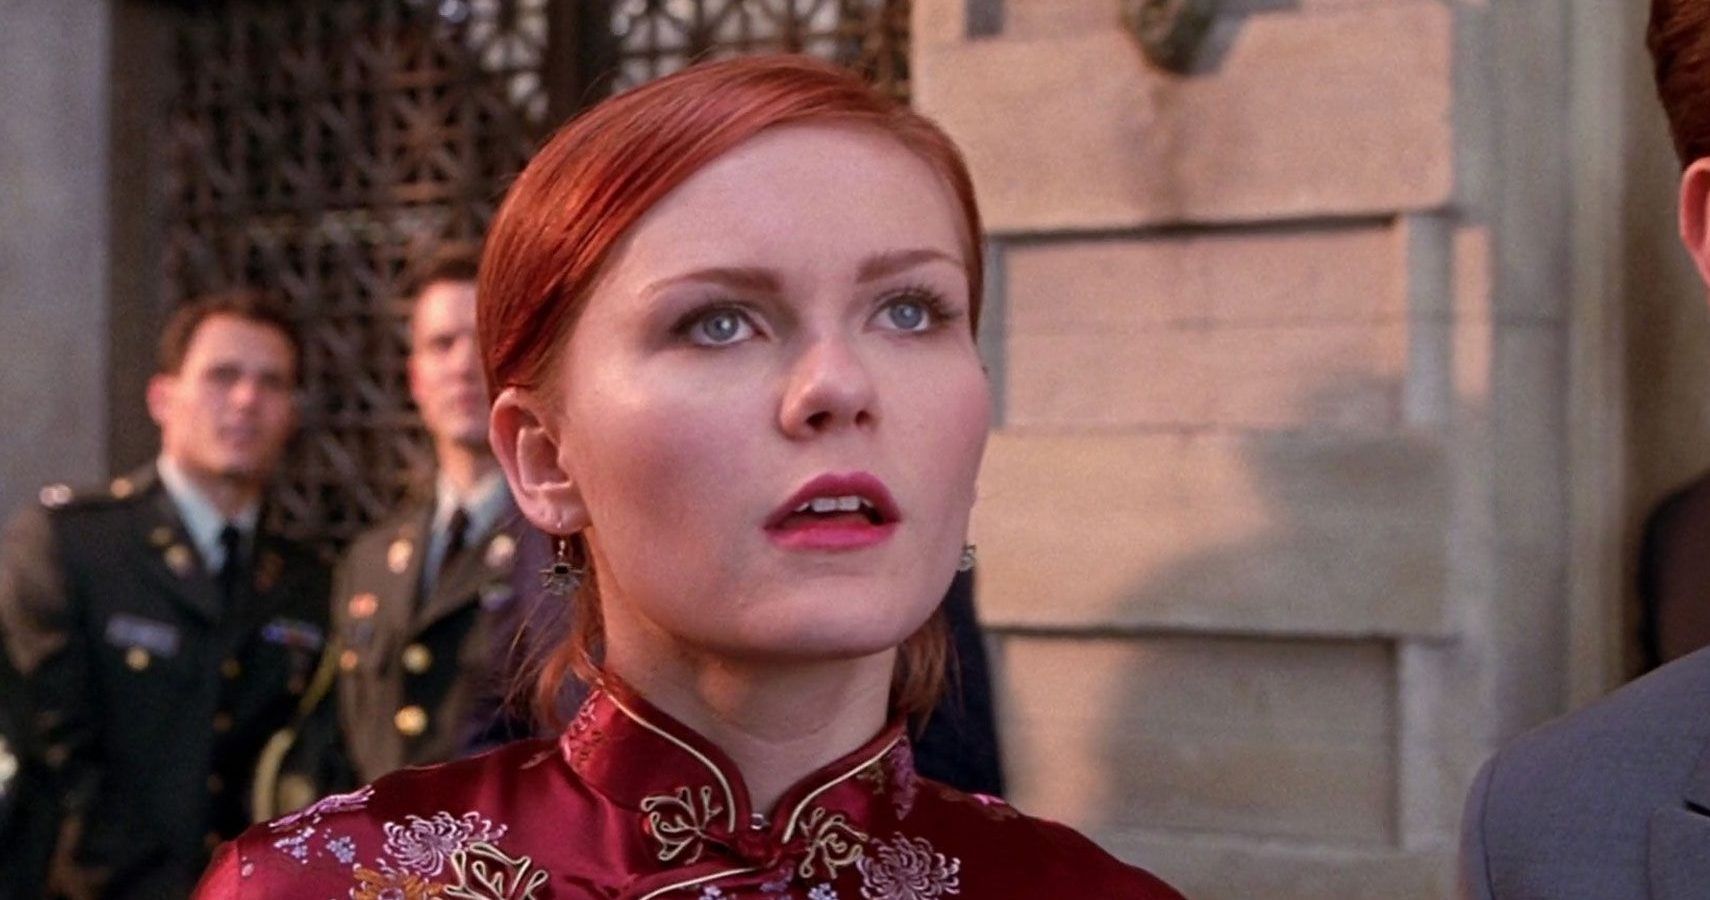 Kirsten Dunst’s 10 Best Movies (According To Rotten Tomatoes)